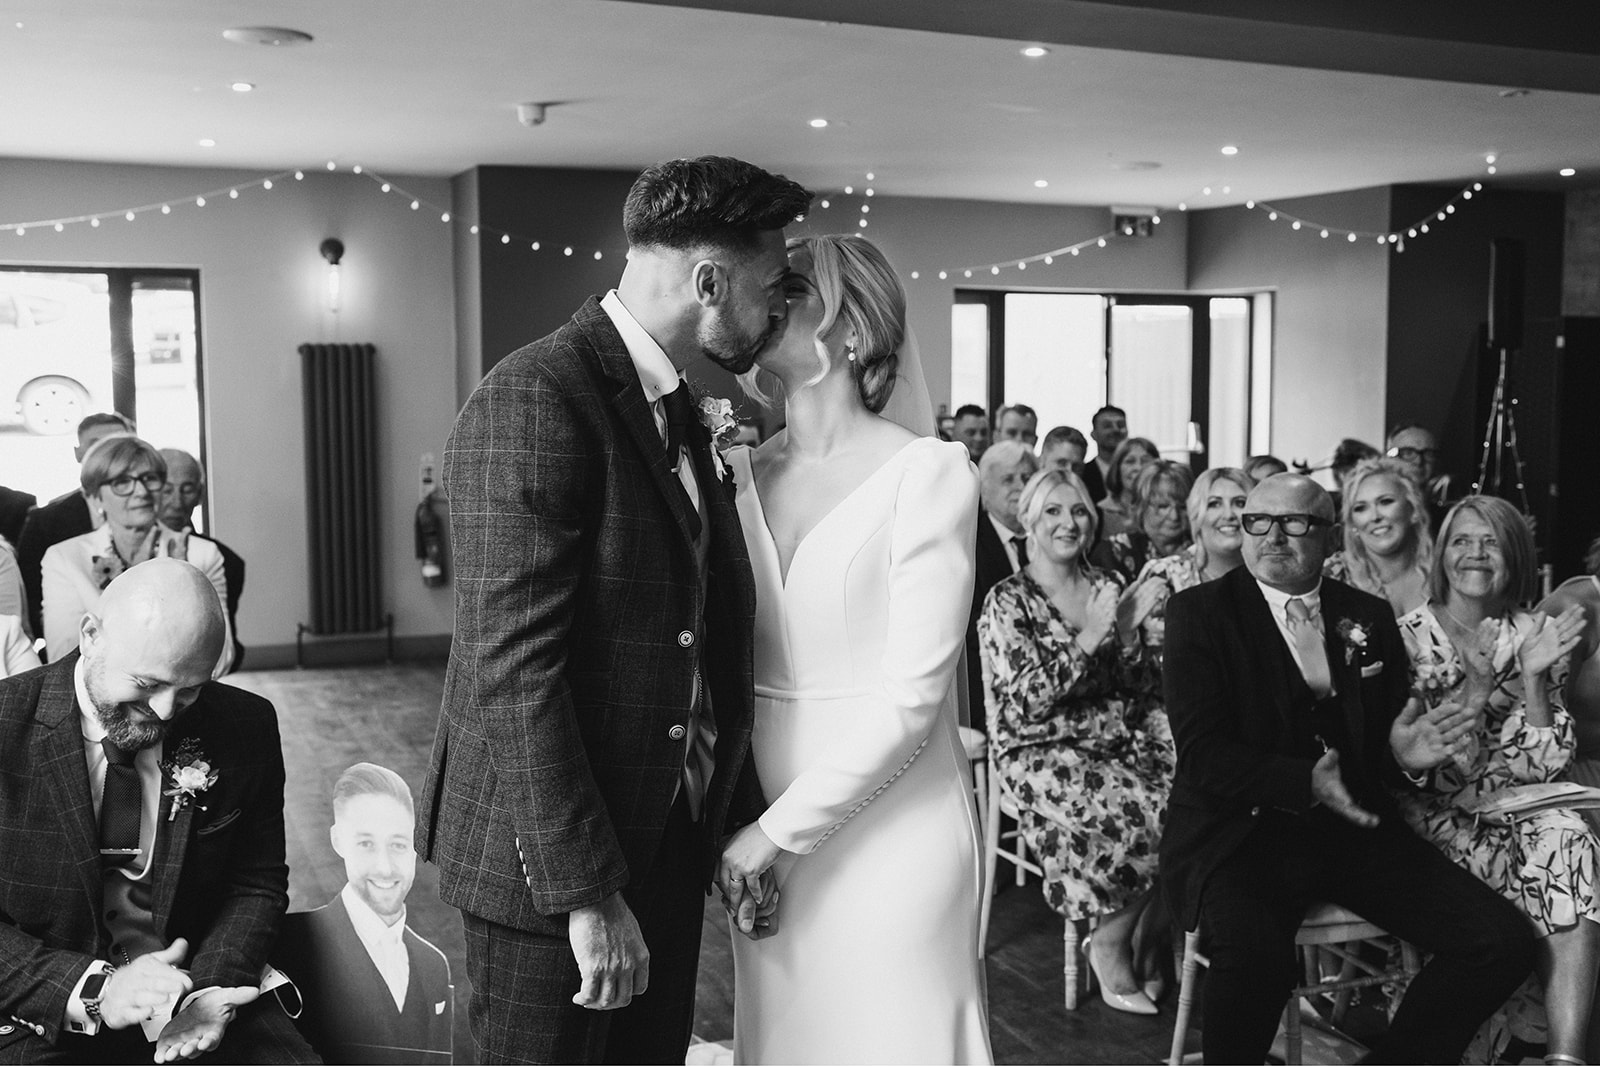 The Chequers Inn Wedding Photography - bride and grooms first kiss during the wedding ceremony